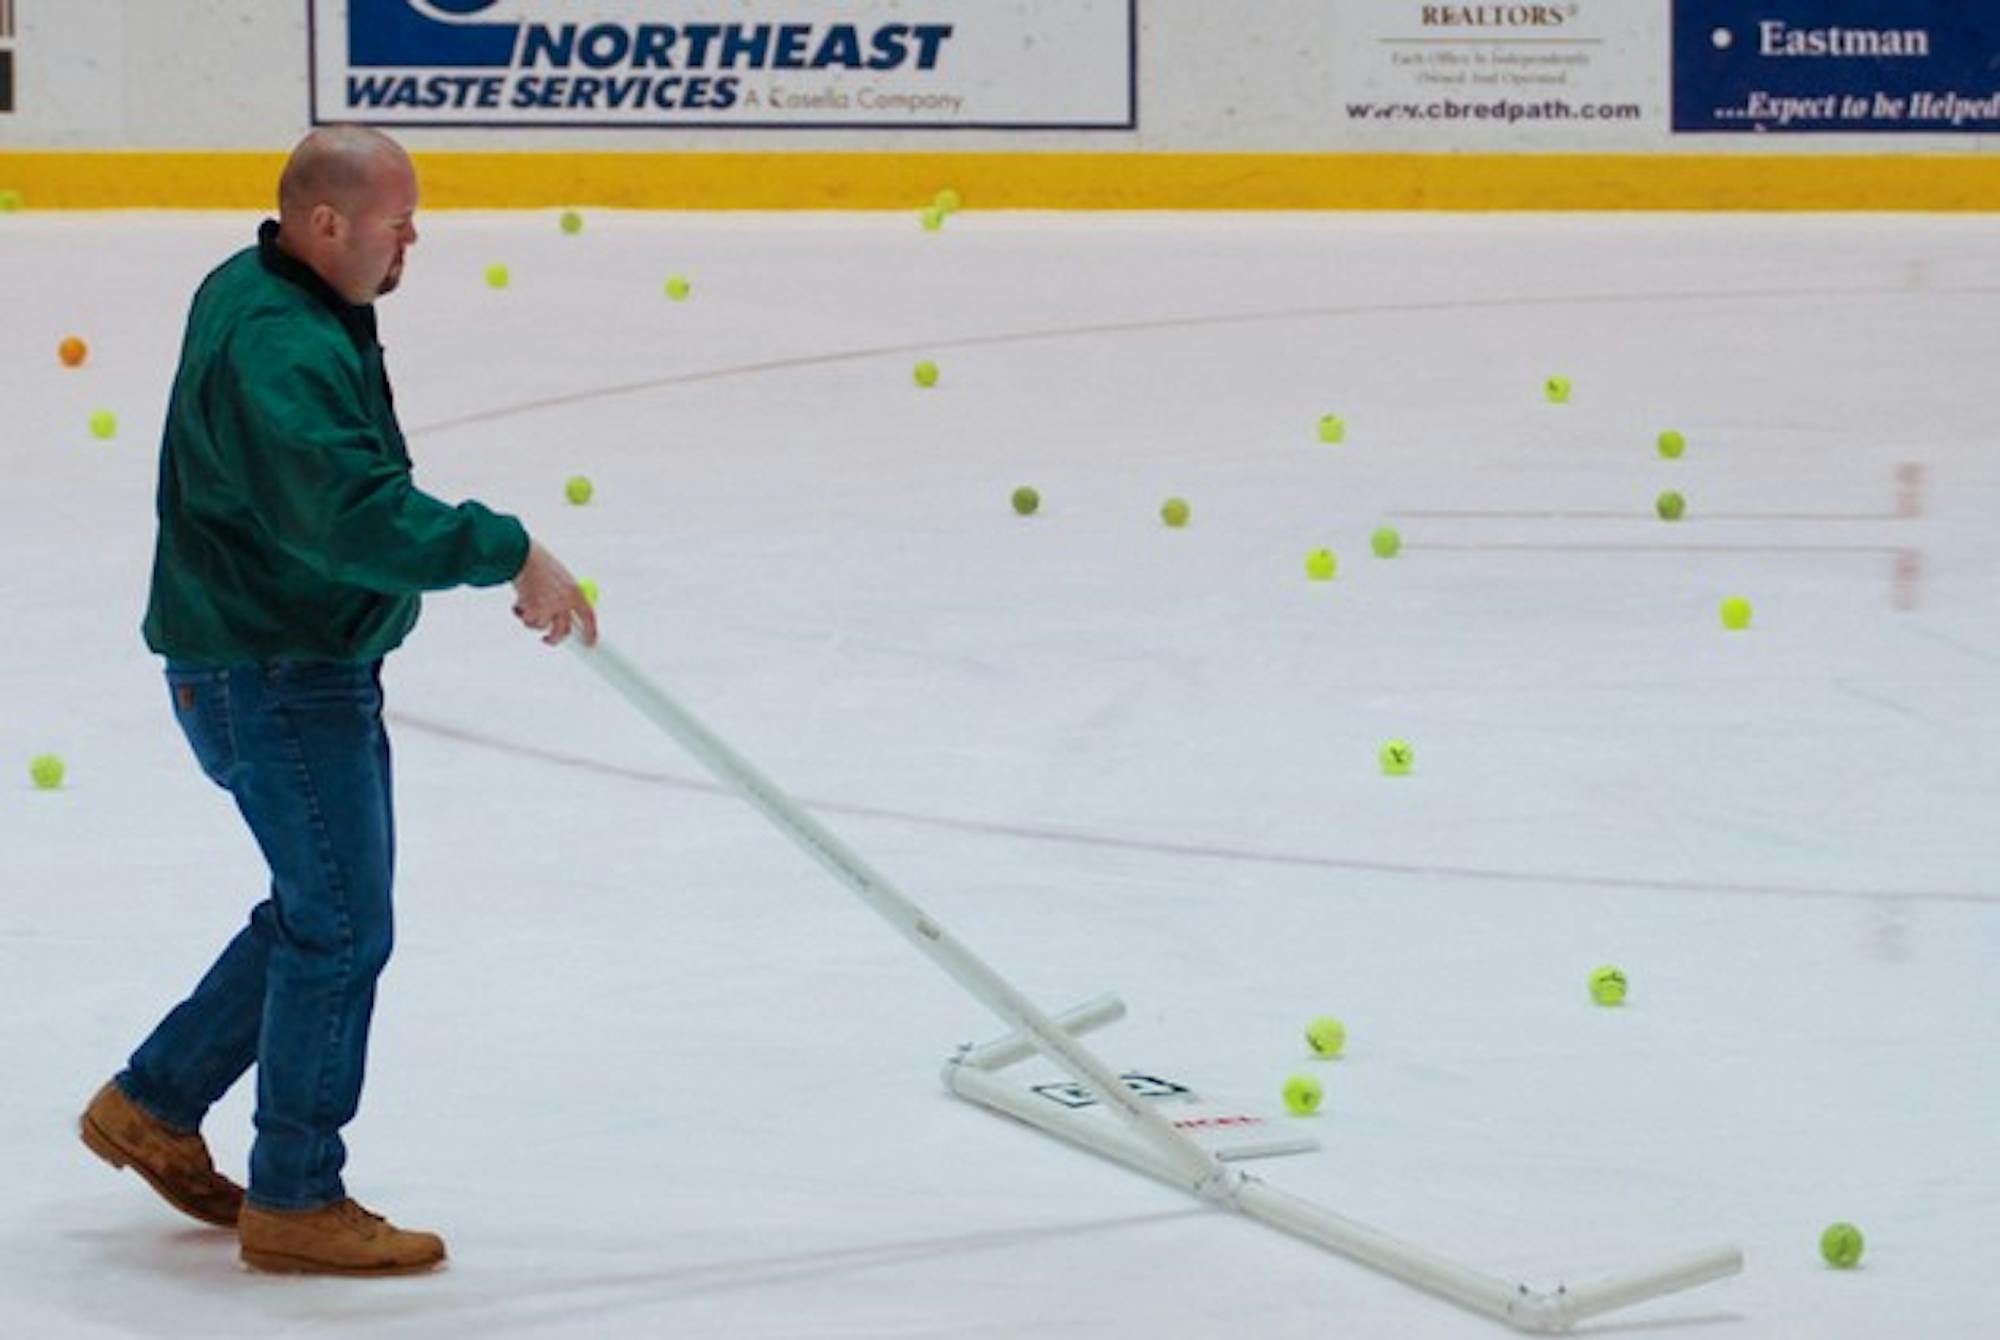 A Thompson Arena staff member cleans up tennis balls thrown onto the ice after the Big Green scored its first goal during last year's Princeton game.